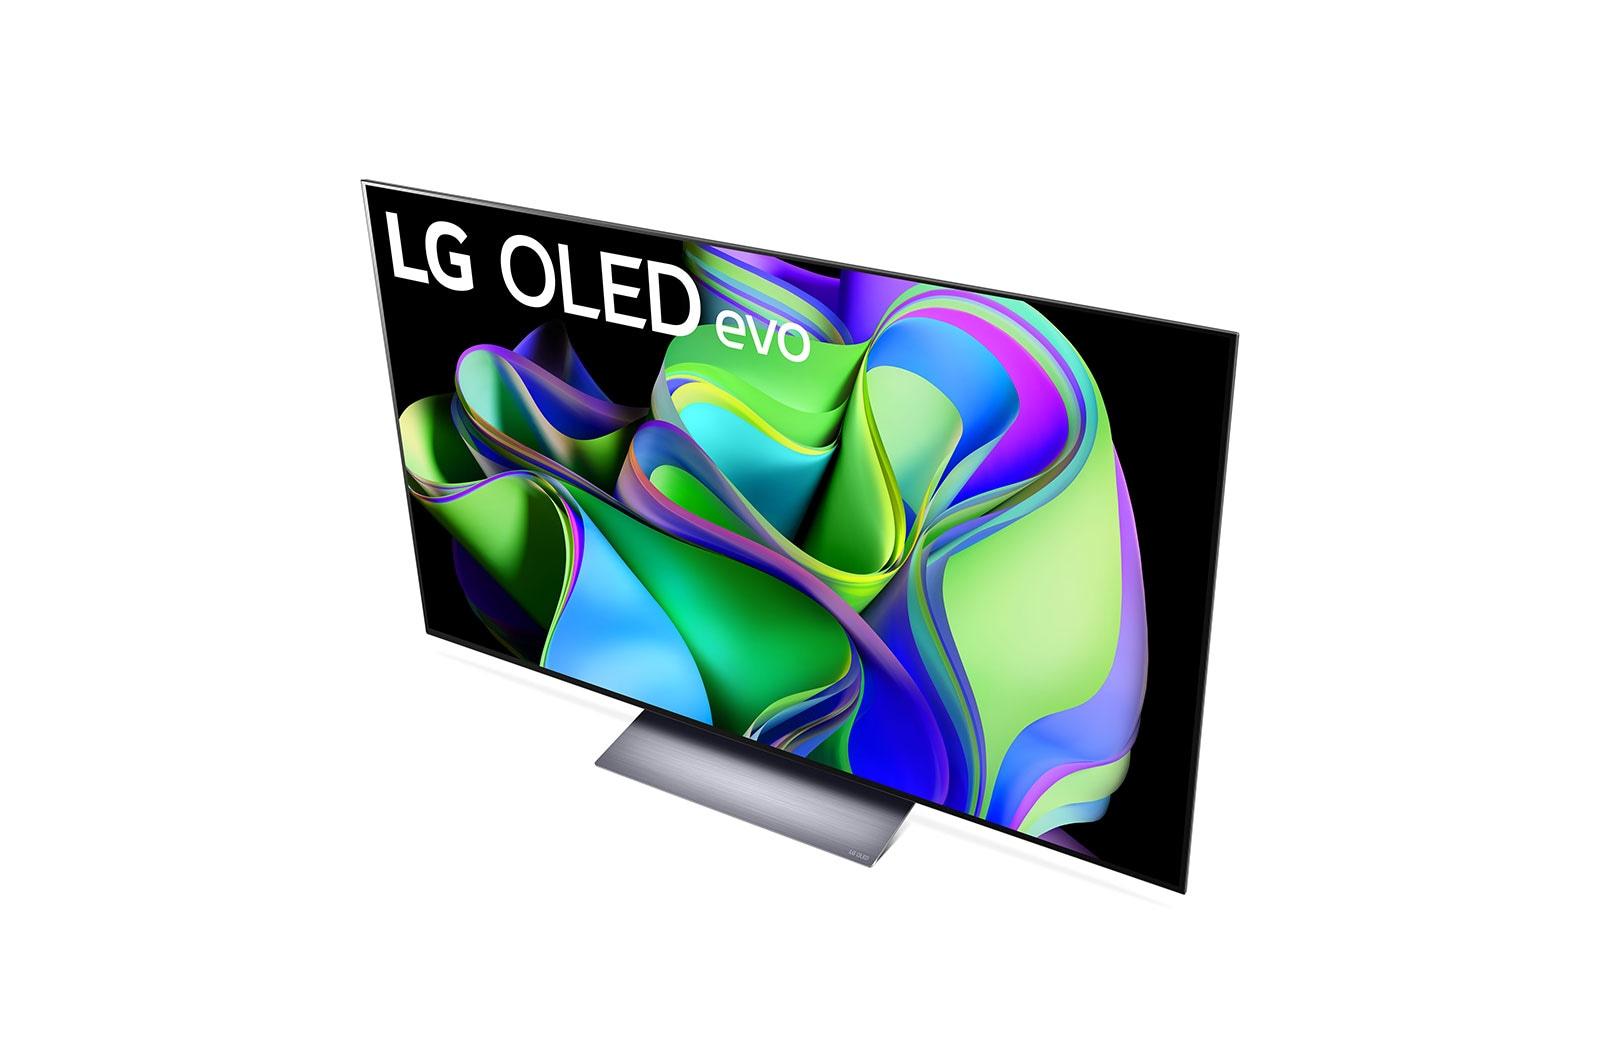 65-inch LG C3 OLED TV is $500 off for a limited time